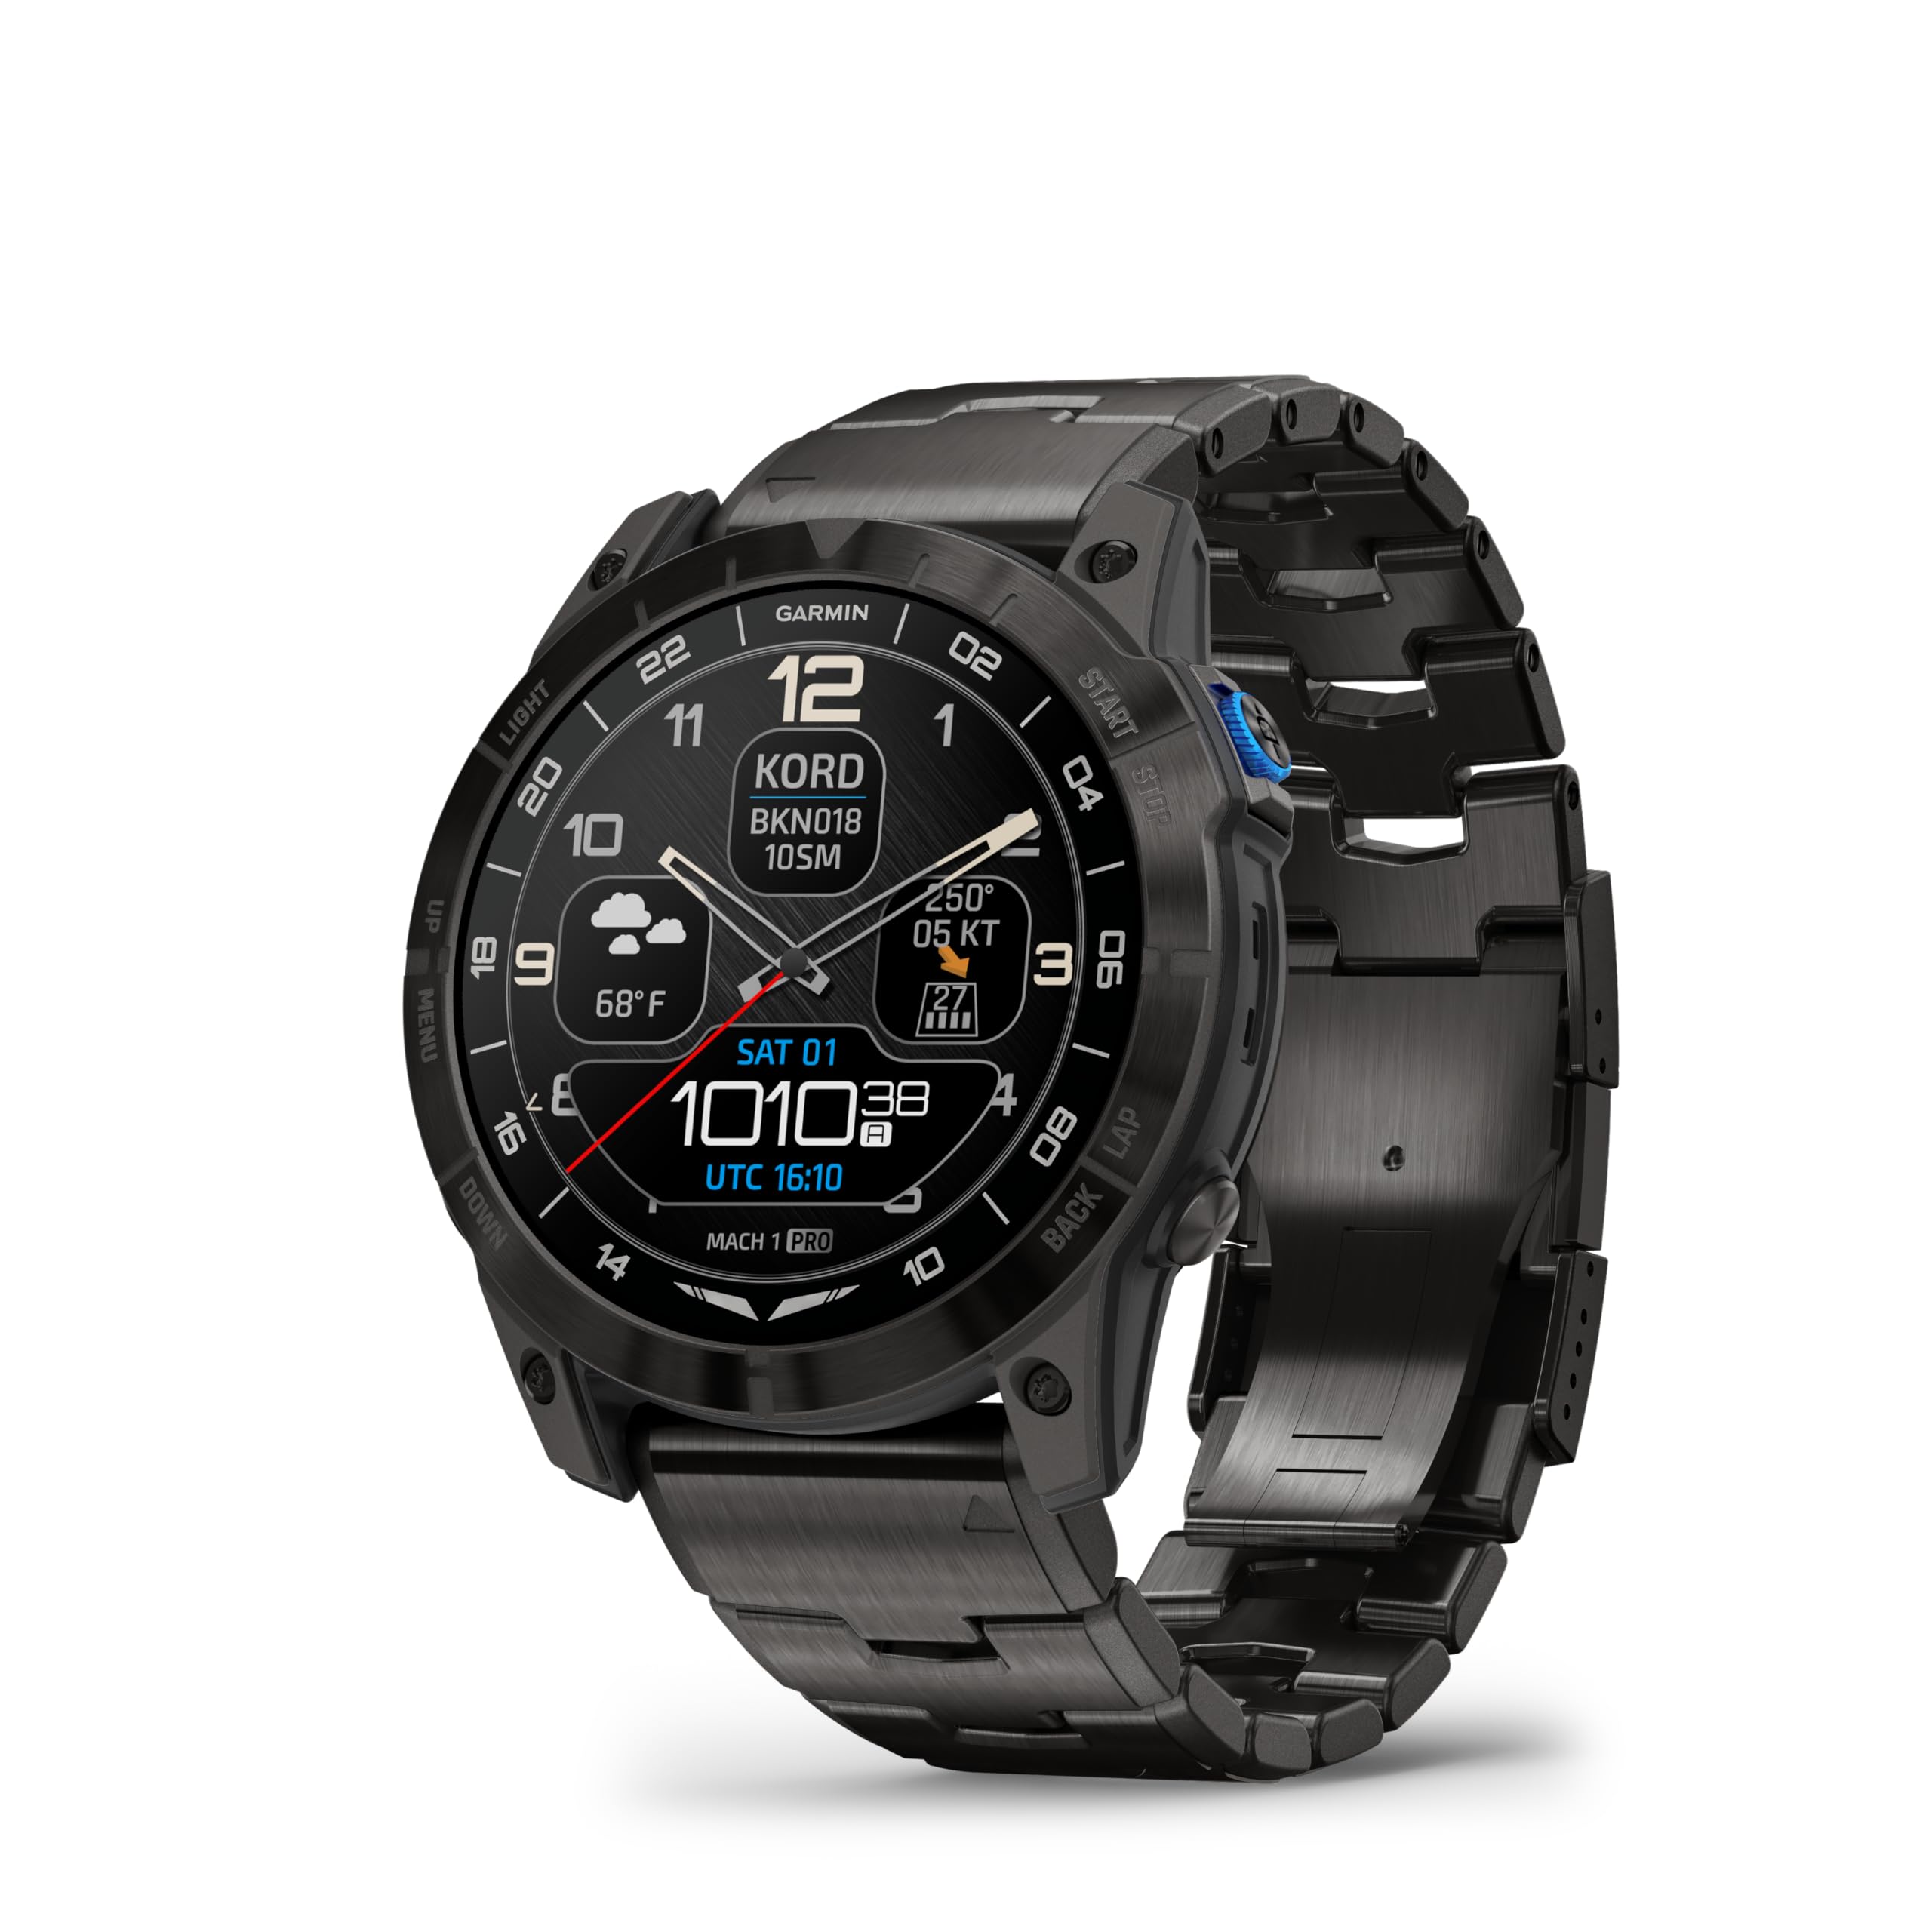 Garmin D2™ Mach 1 Pro, Aviator Smartwatch with GPS Moving Map, Aviation Weather, Health and Wellness Features, AMOLED Display, and Built-in Flashlight